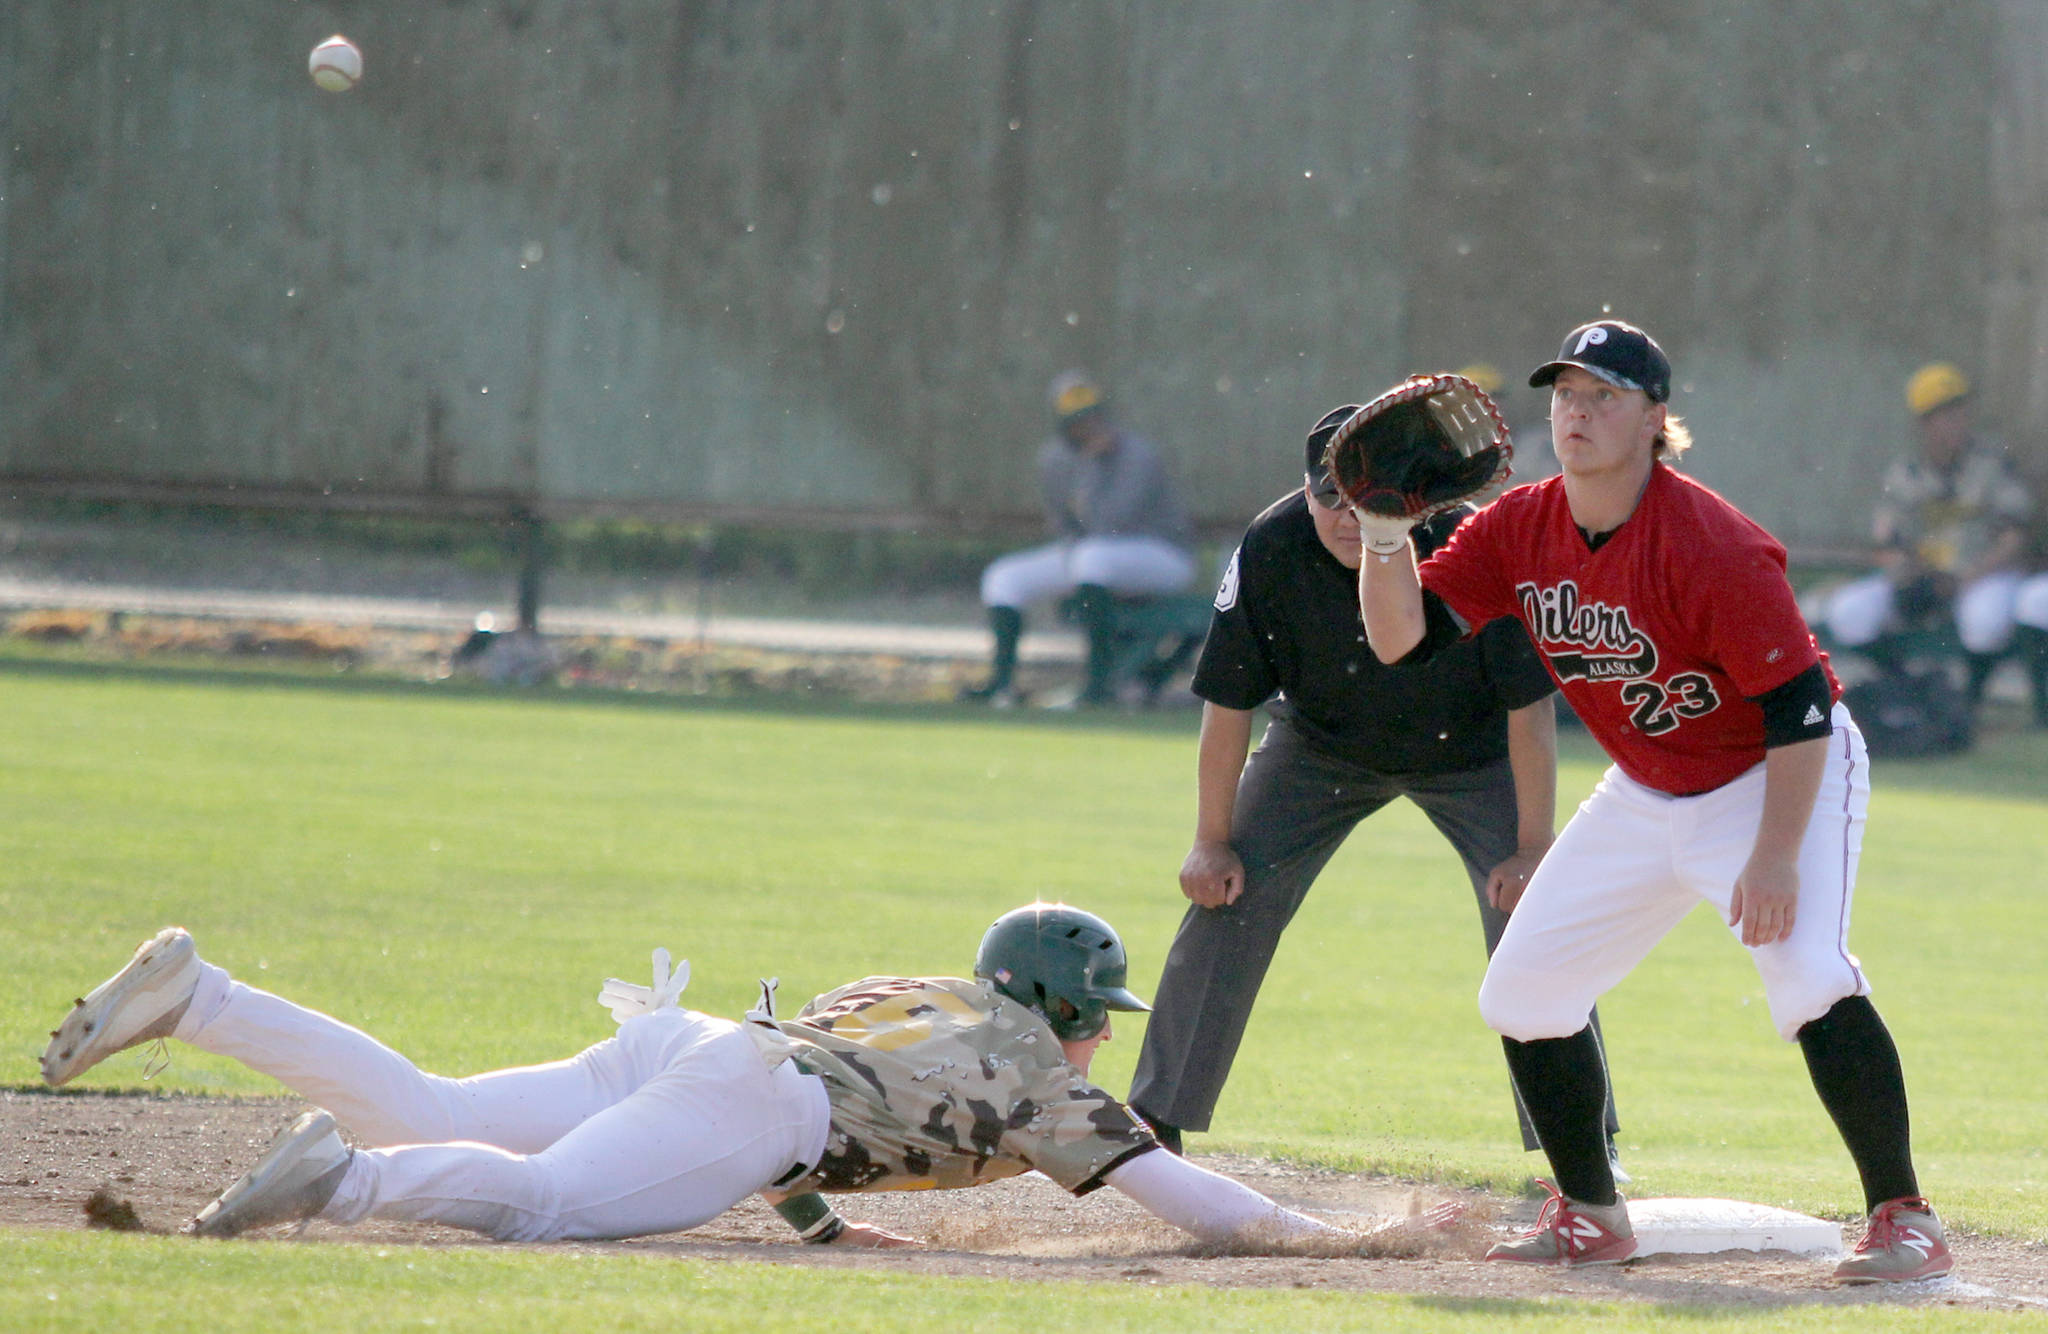 Peninsula Oilers’ Connor McCord takes the throw at first as Mat-Su’s Justin Kirby slides back during an 11-5 loss to the Miners on Friday in Palmer. (Photo by Jeremiah Bartz/Frontiersman)